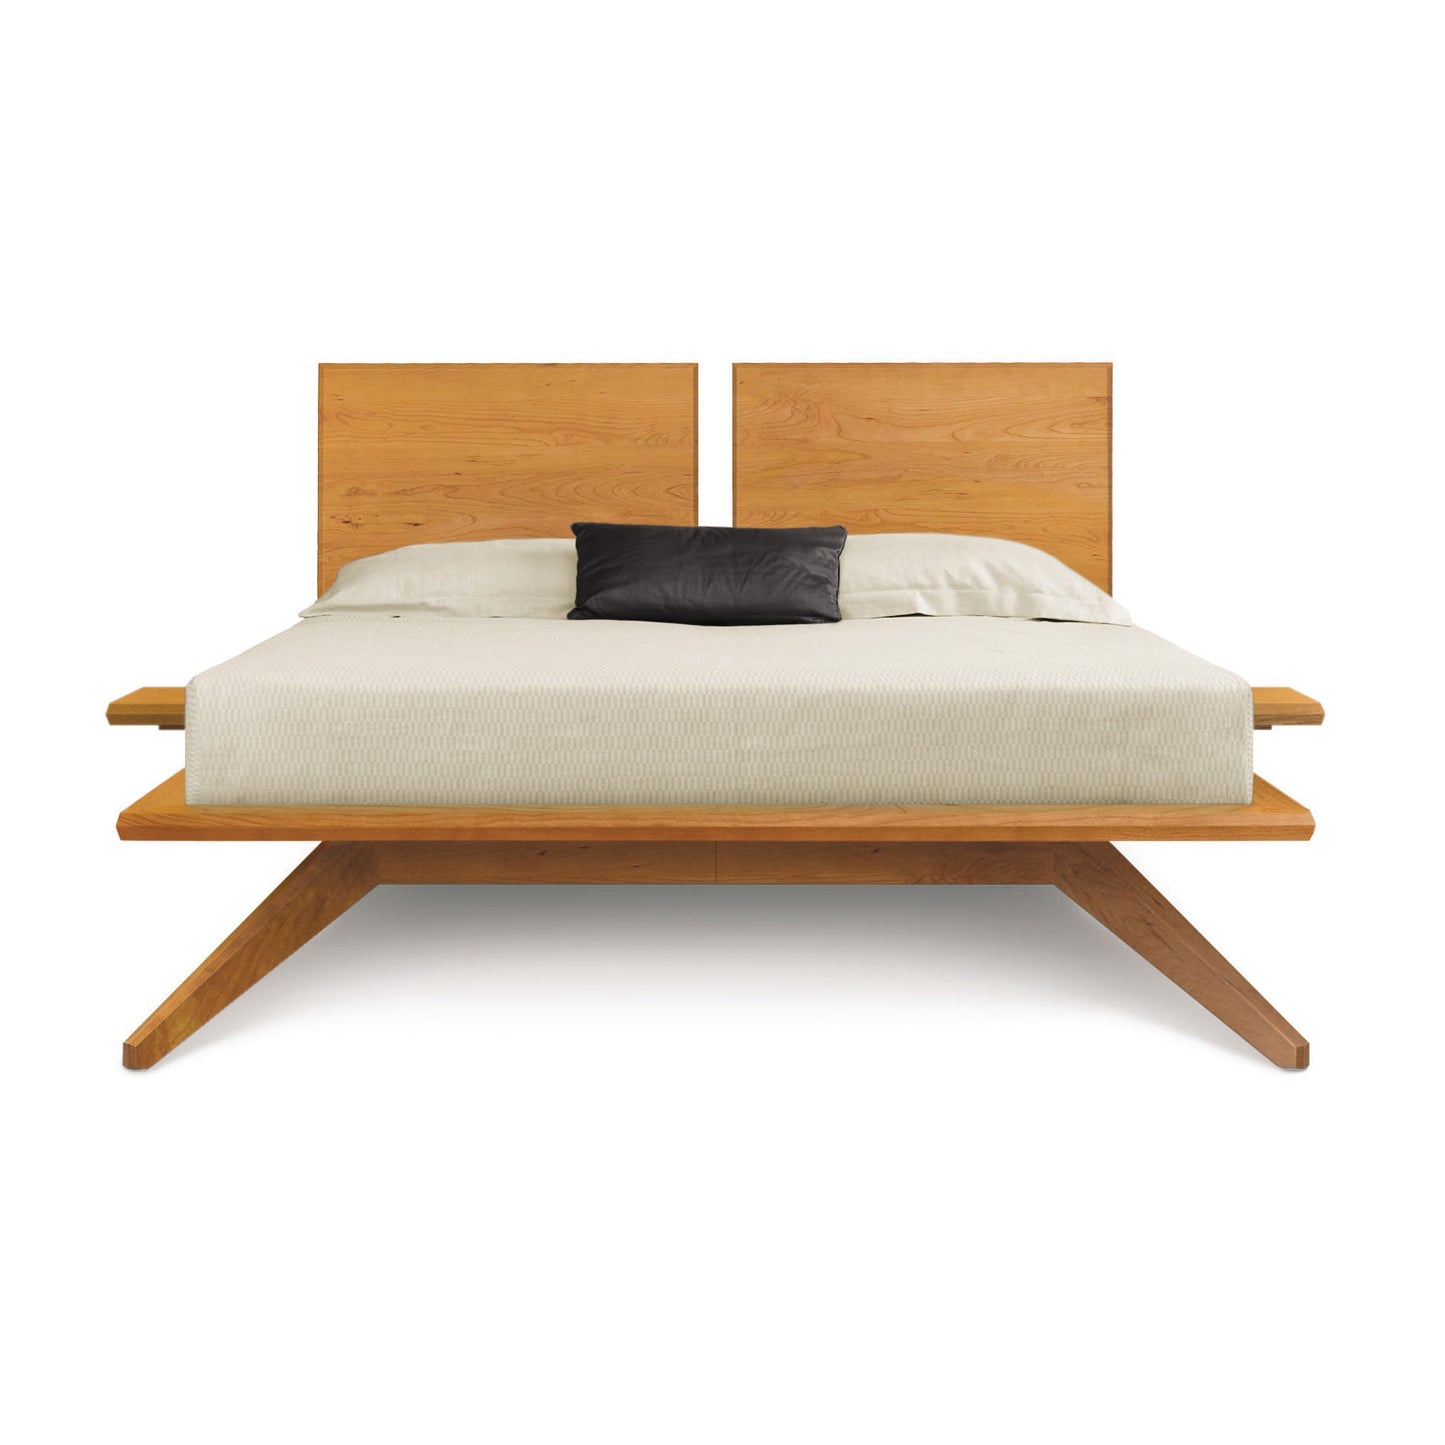 A modern Astrid Cherry Platform Bed frame from Copeland Furniture with a light-colored mattress and a set of pillows, isolated on a white background.